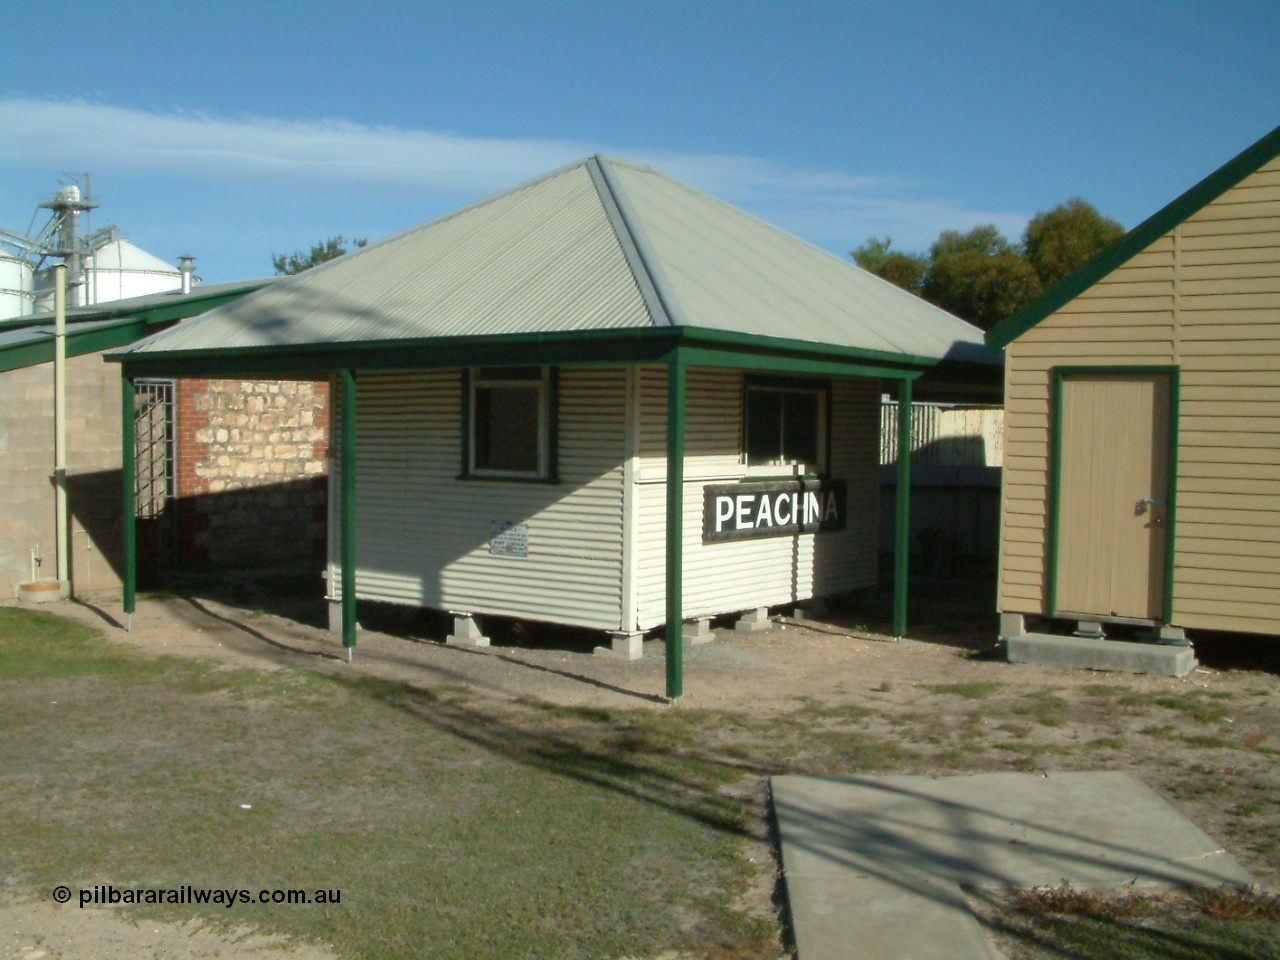 030405 160954
Lock and District Historical Museum, former railway station portable office building with original Peachna station sign, 5th April 2003.
